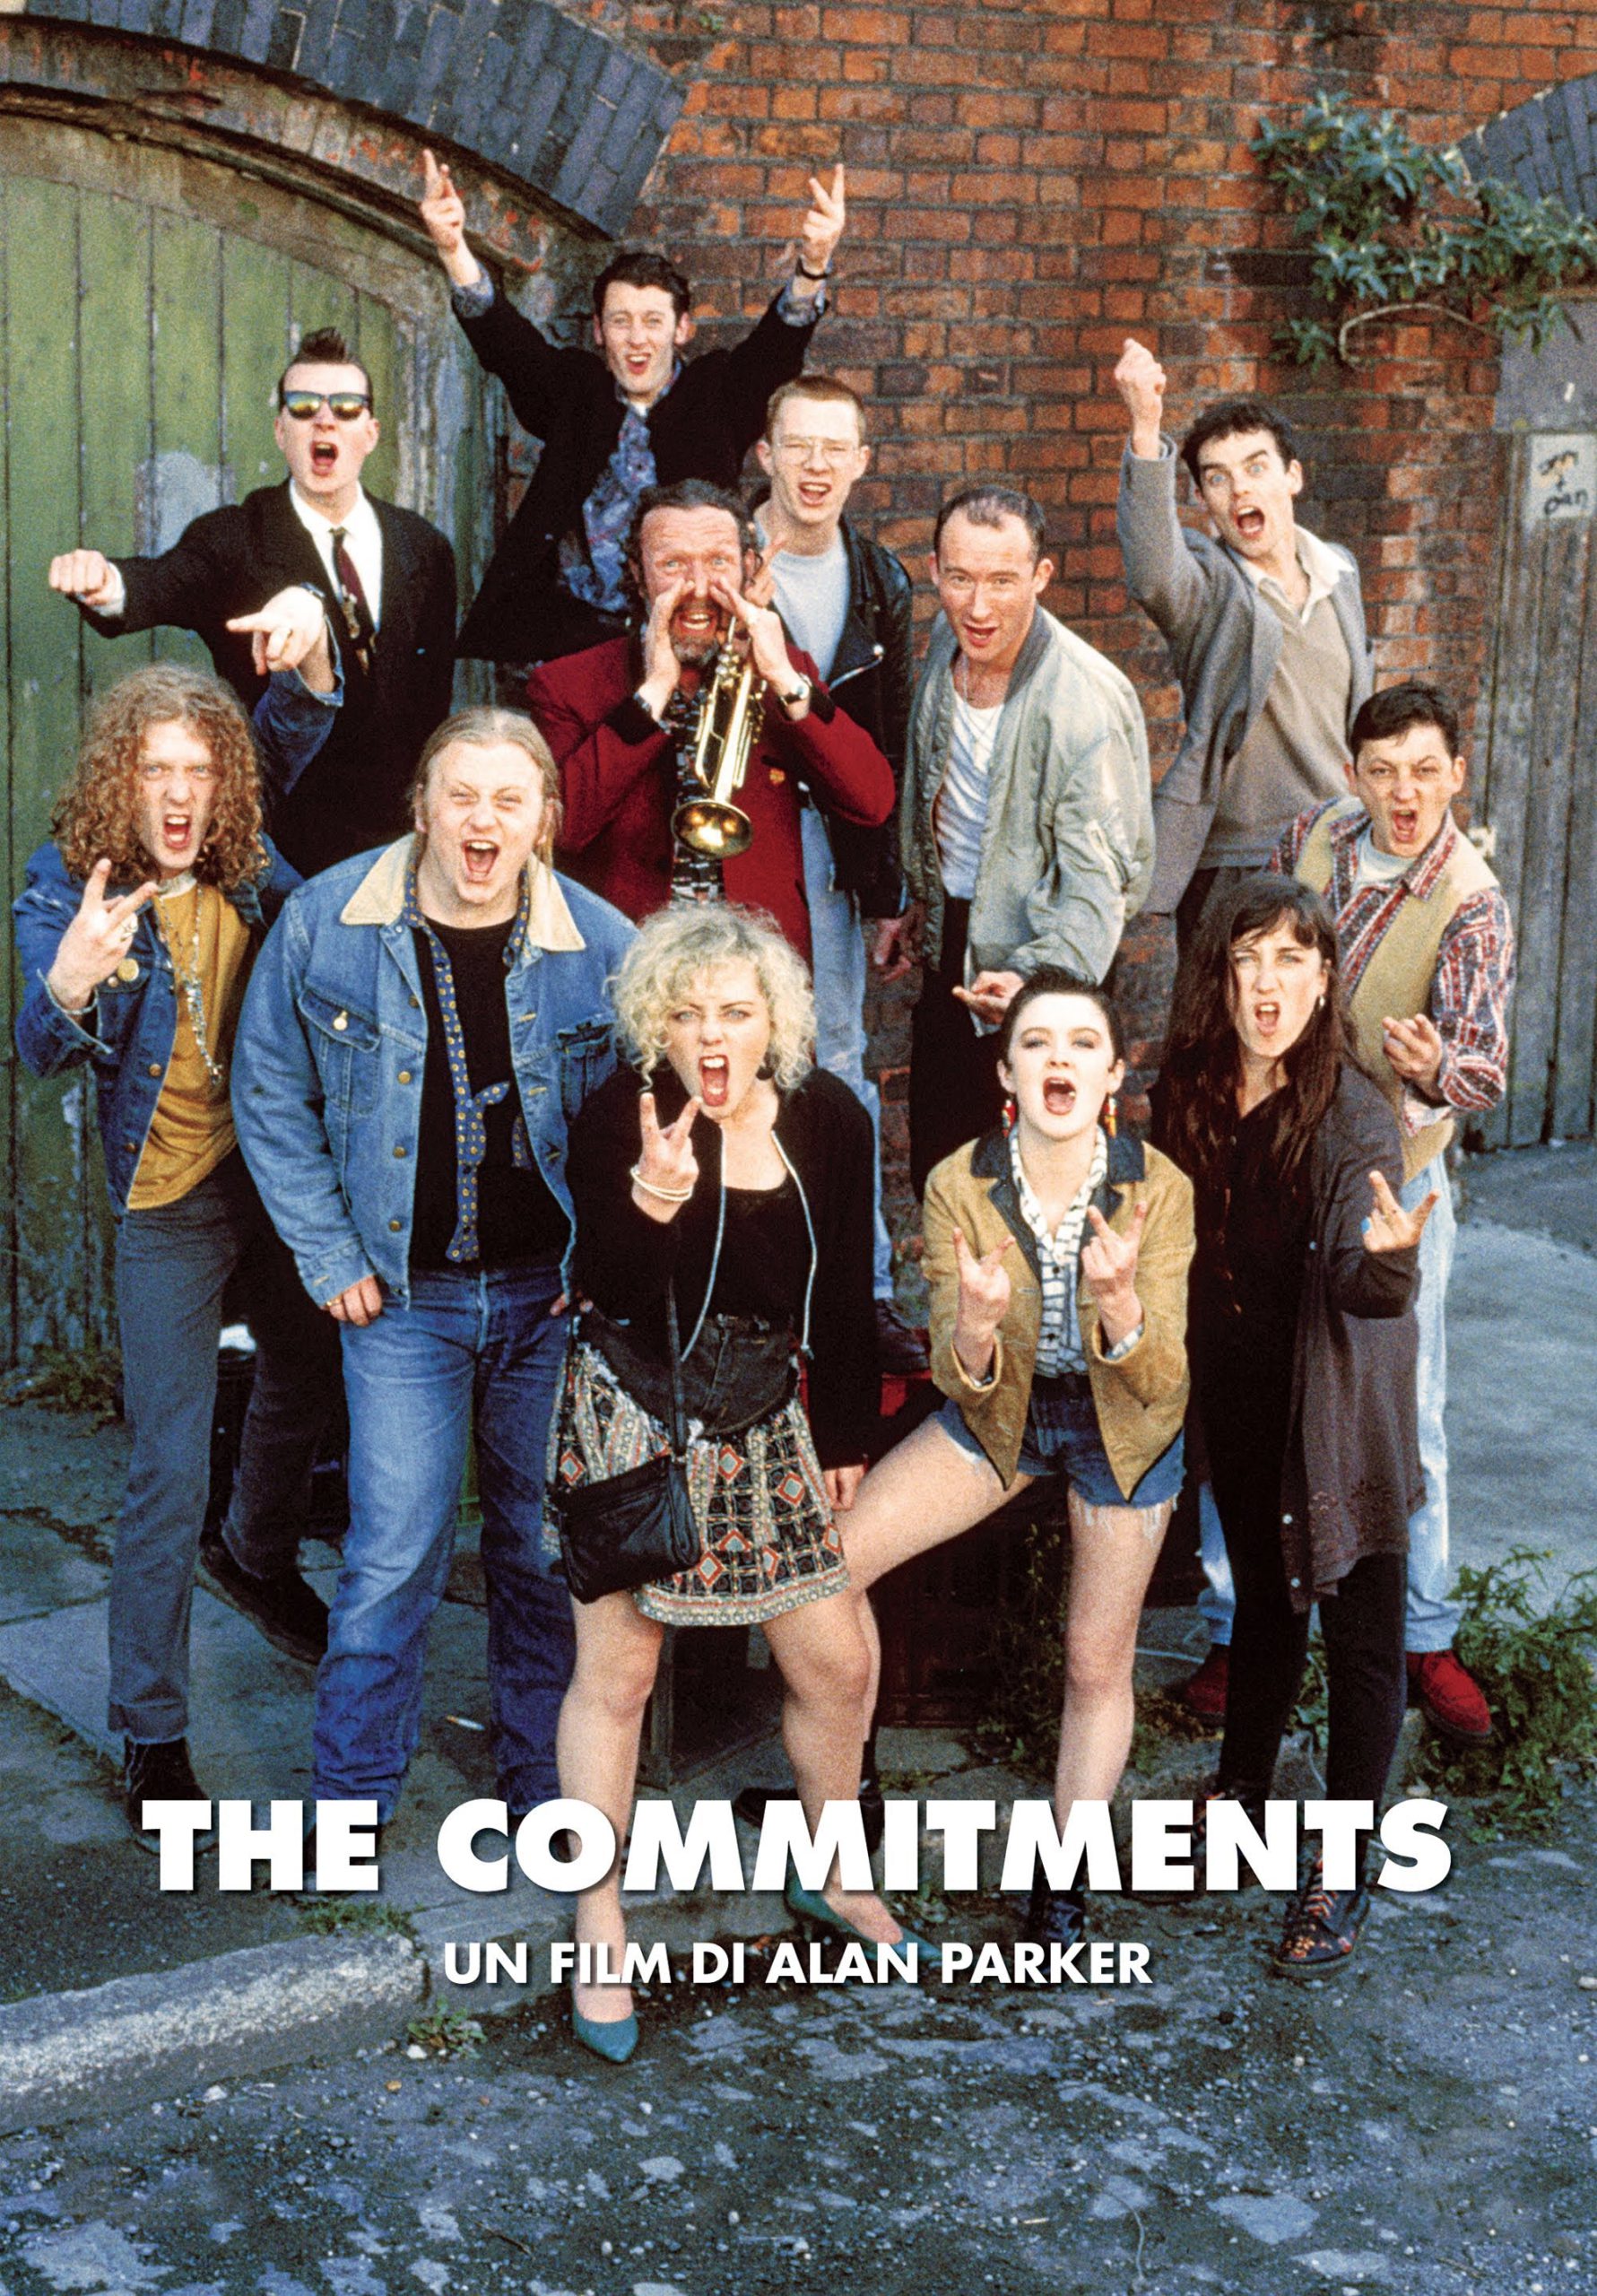 The Commitments [HD] (1991)